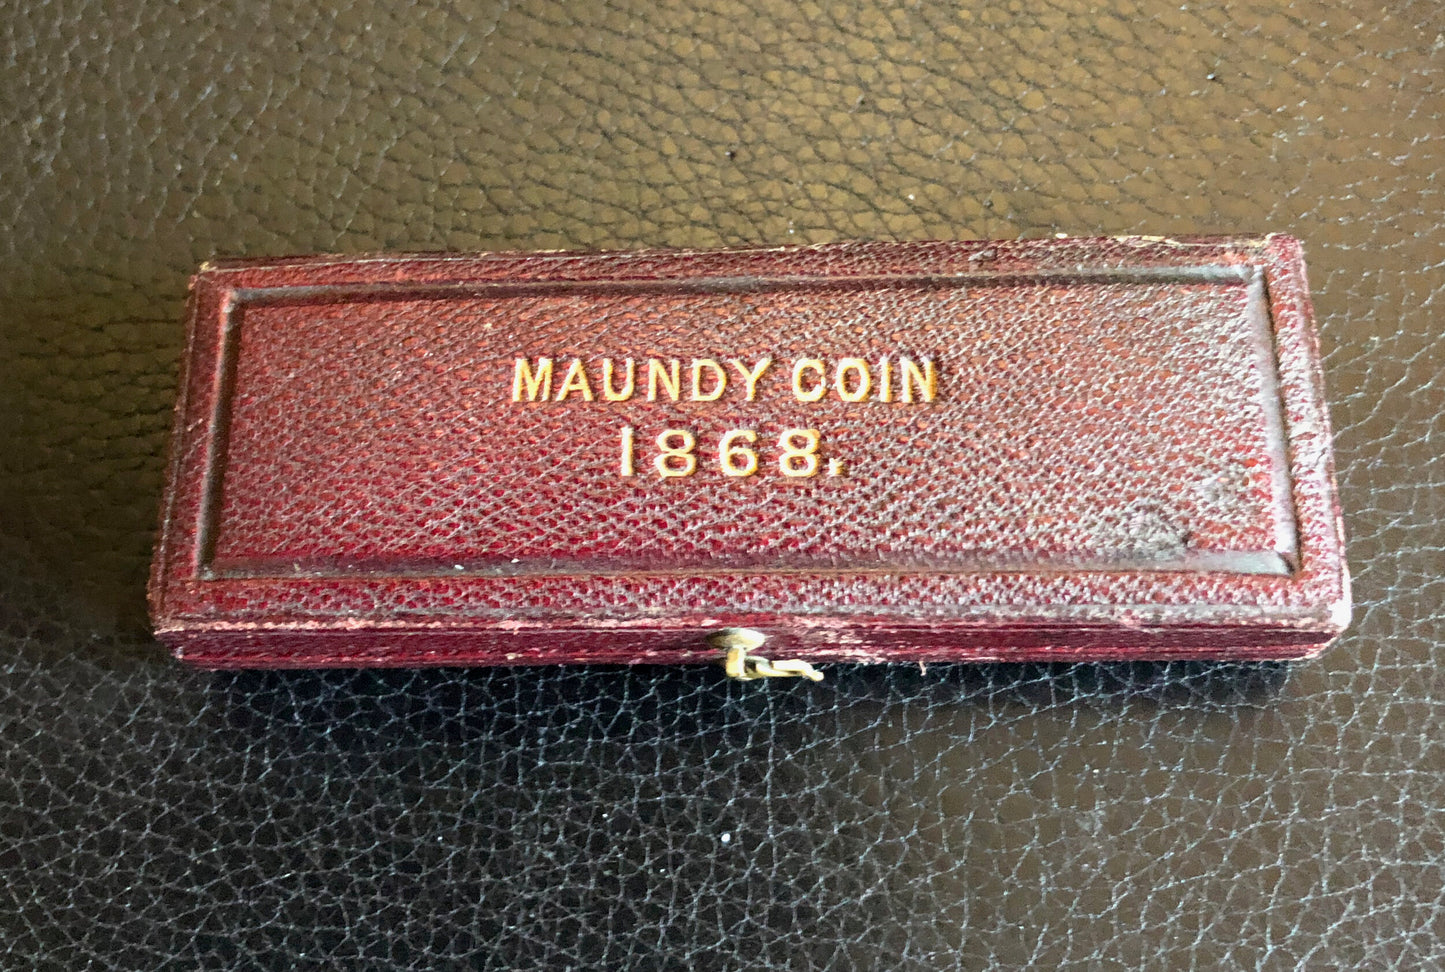 1868 Maundy set S3916 ESC 3518 in a dated box AUNC